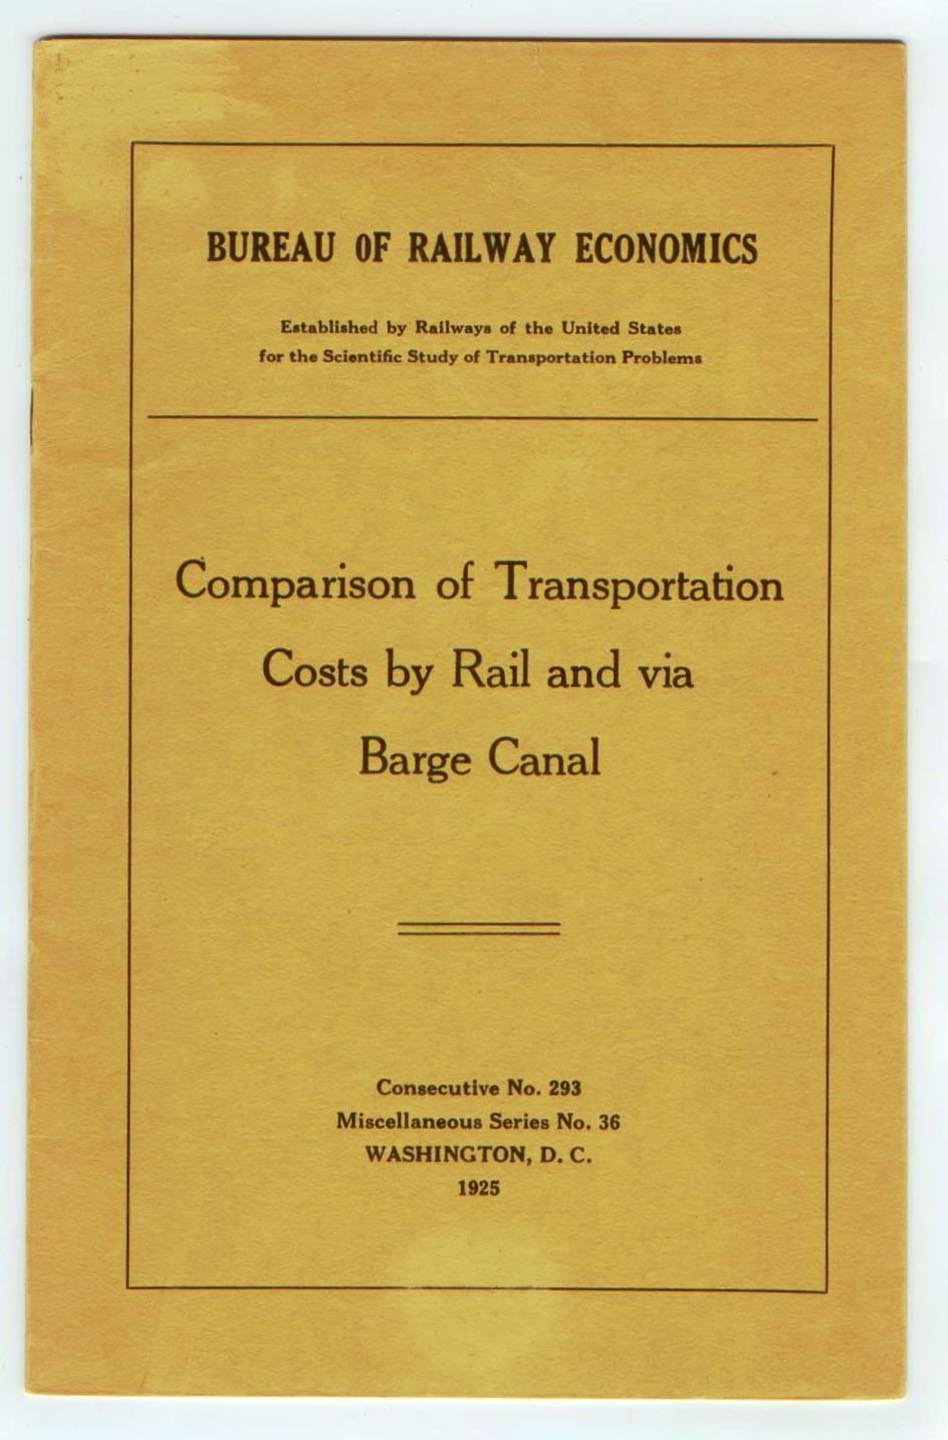 Comparison of Transportation Costs by Rail and via Barge Canal